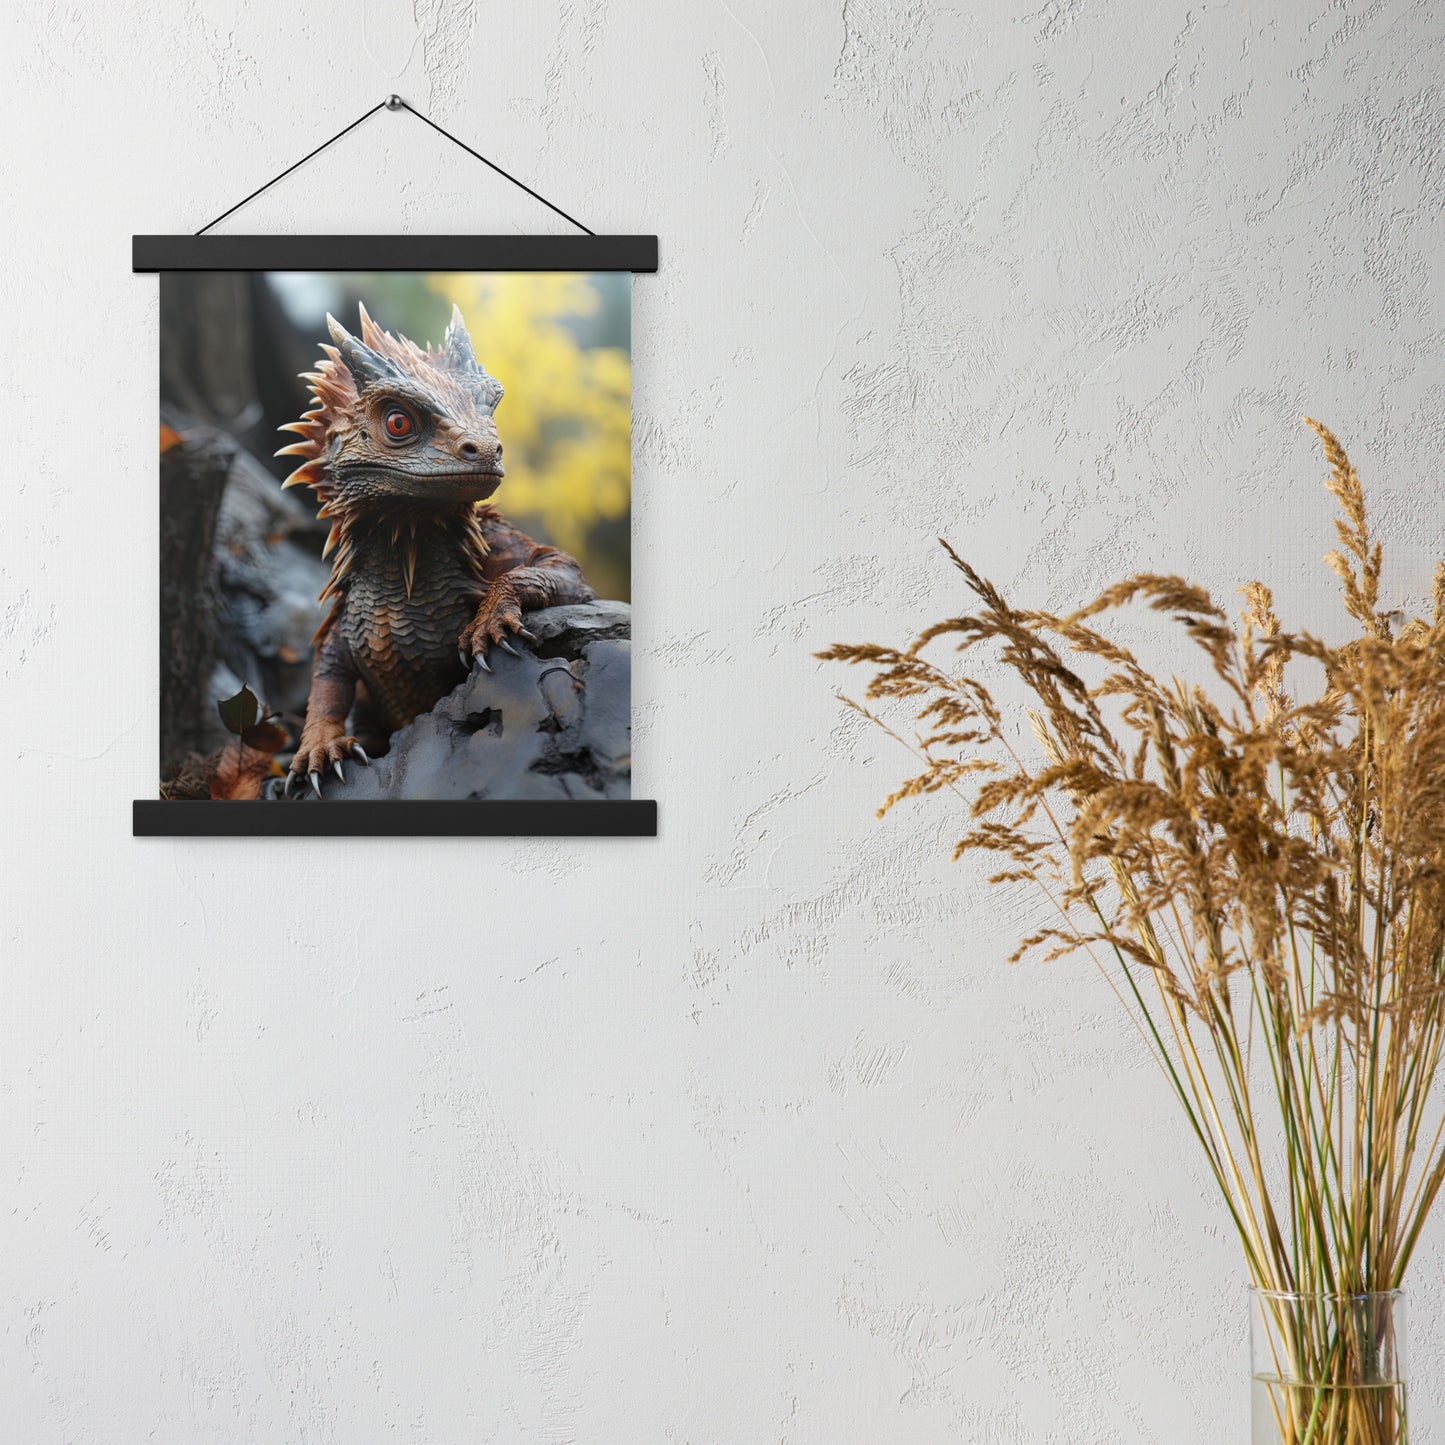 Hatchling | Baby Dragon Poster with hangers